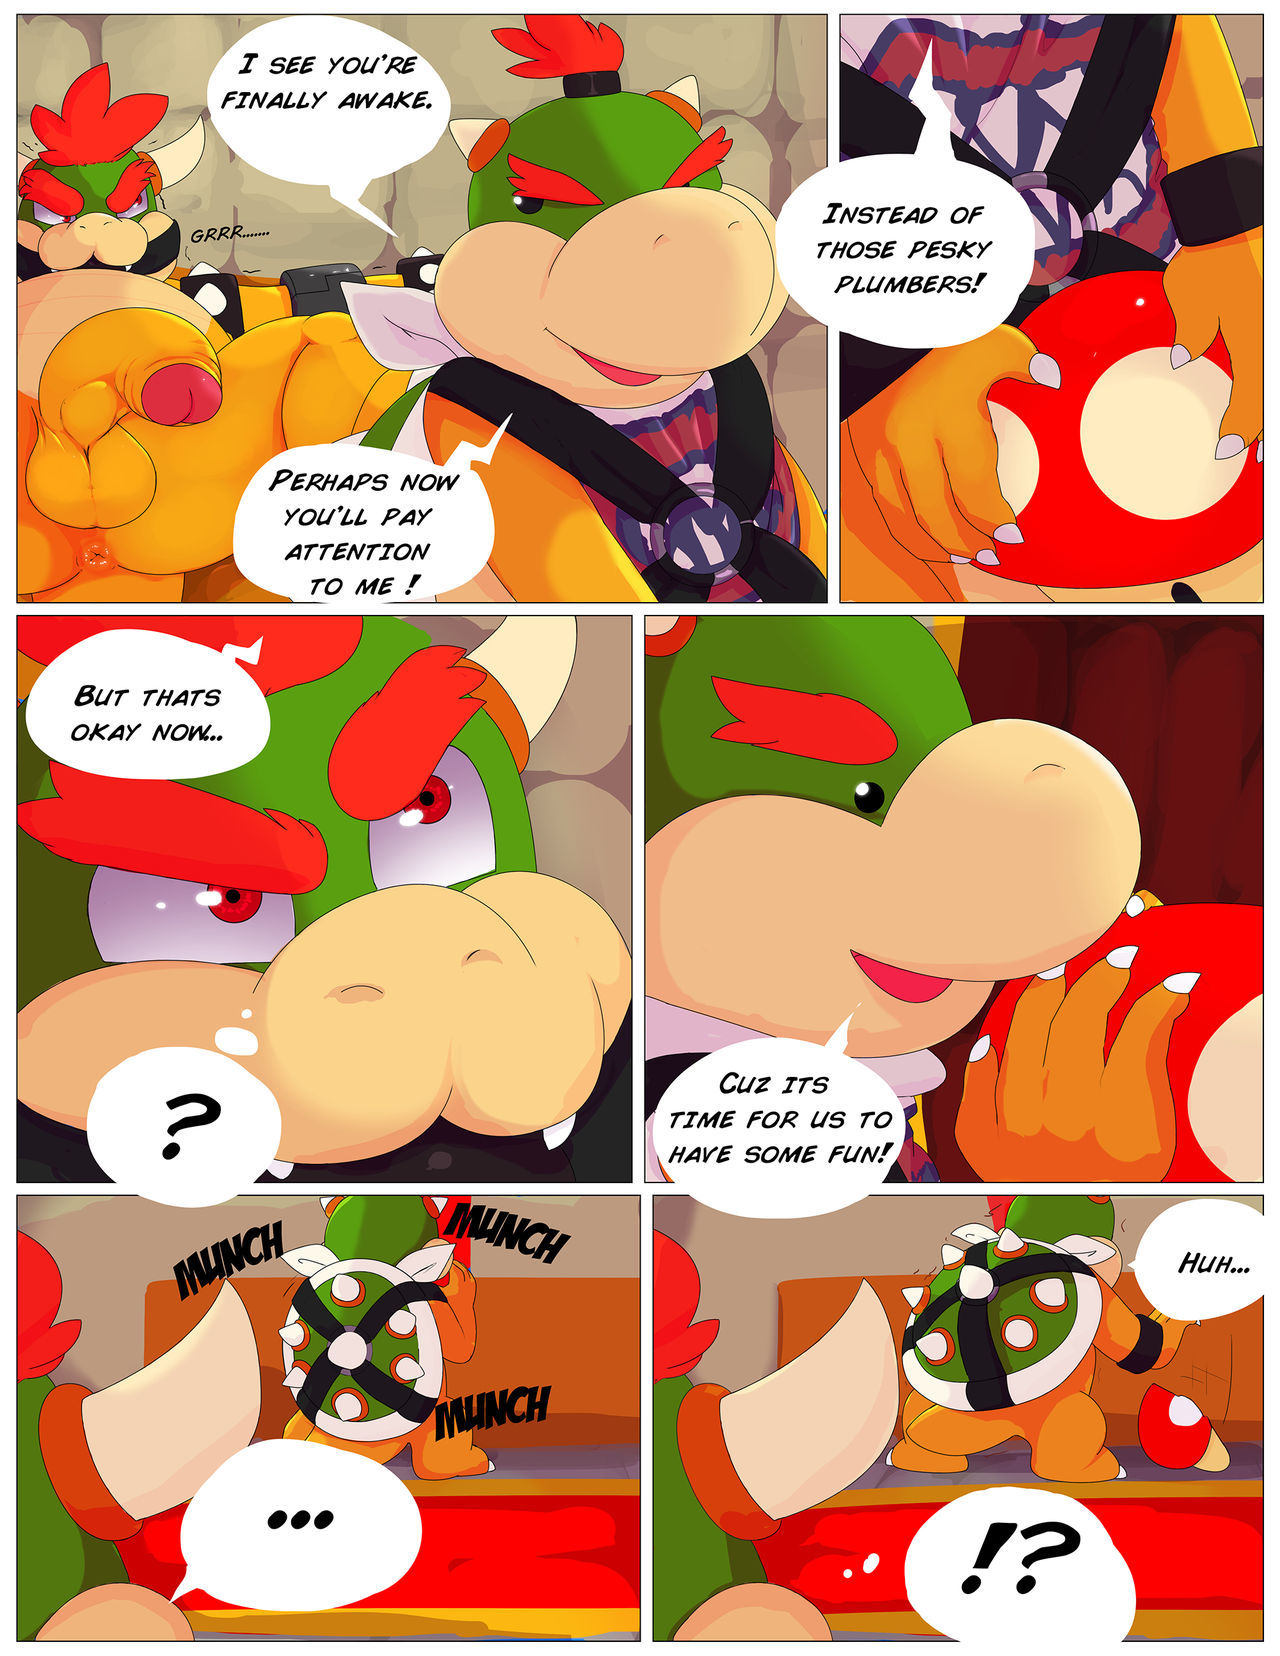 Family Bonding - Super Mario Brothers page 2